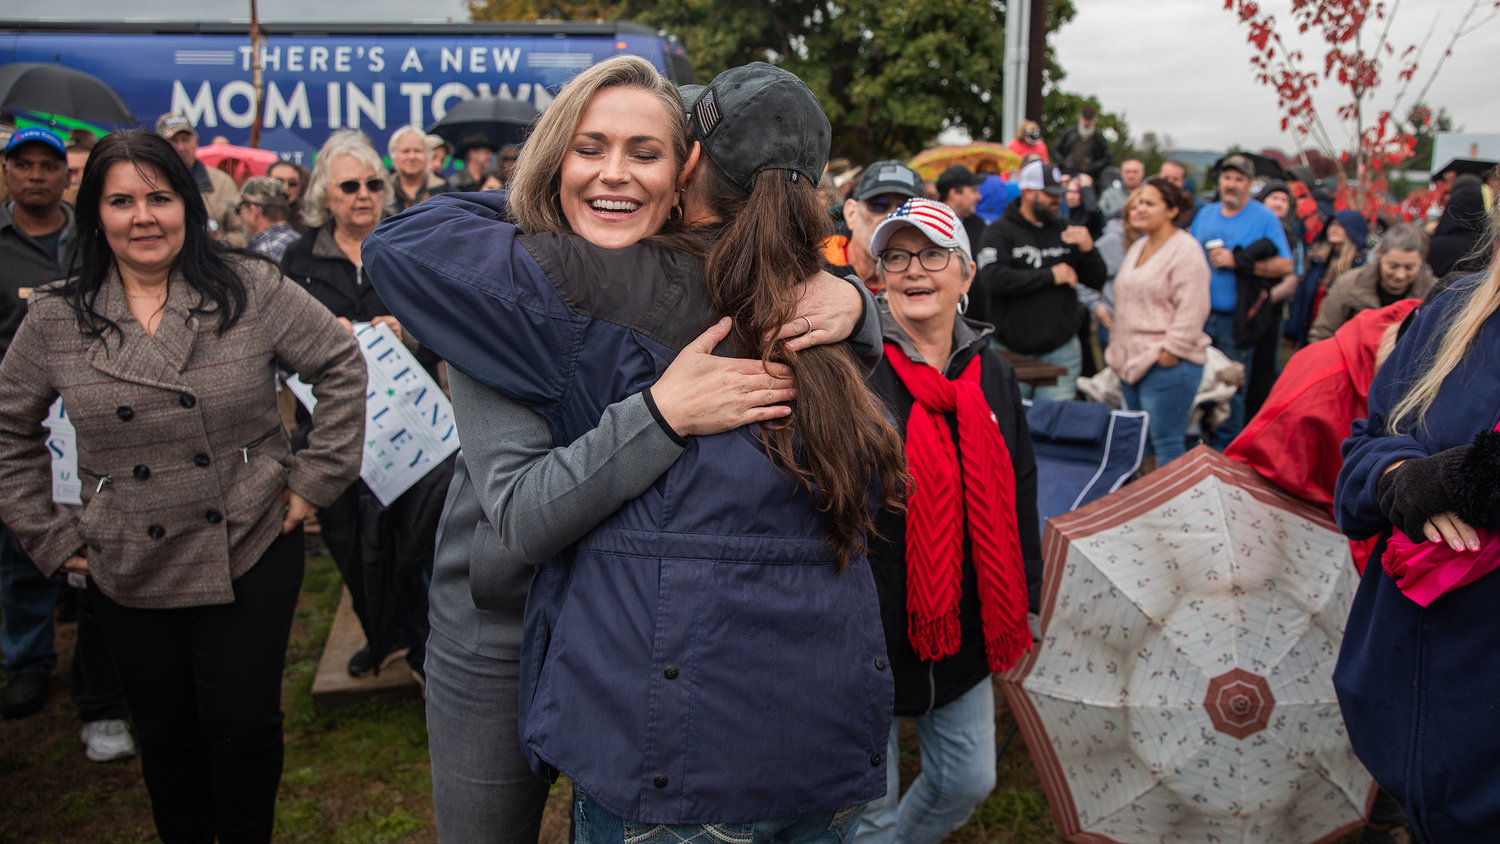 U.S. Senate candidate Tiffany Smiley hugs supporters in front of her tour bus during a stop in Adna on Sunday.